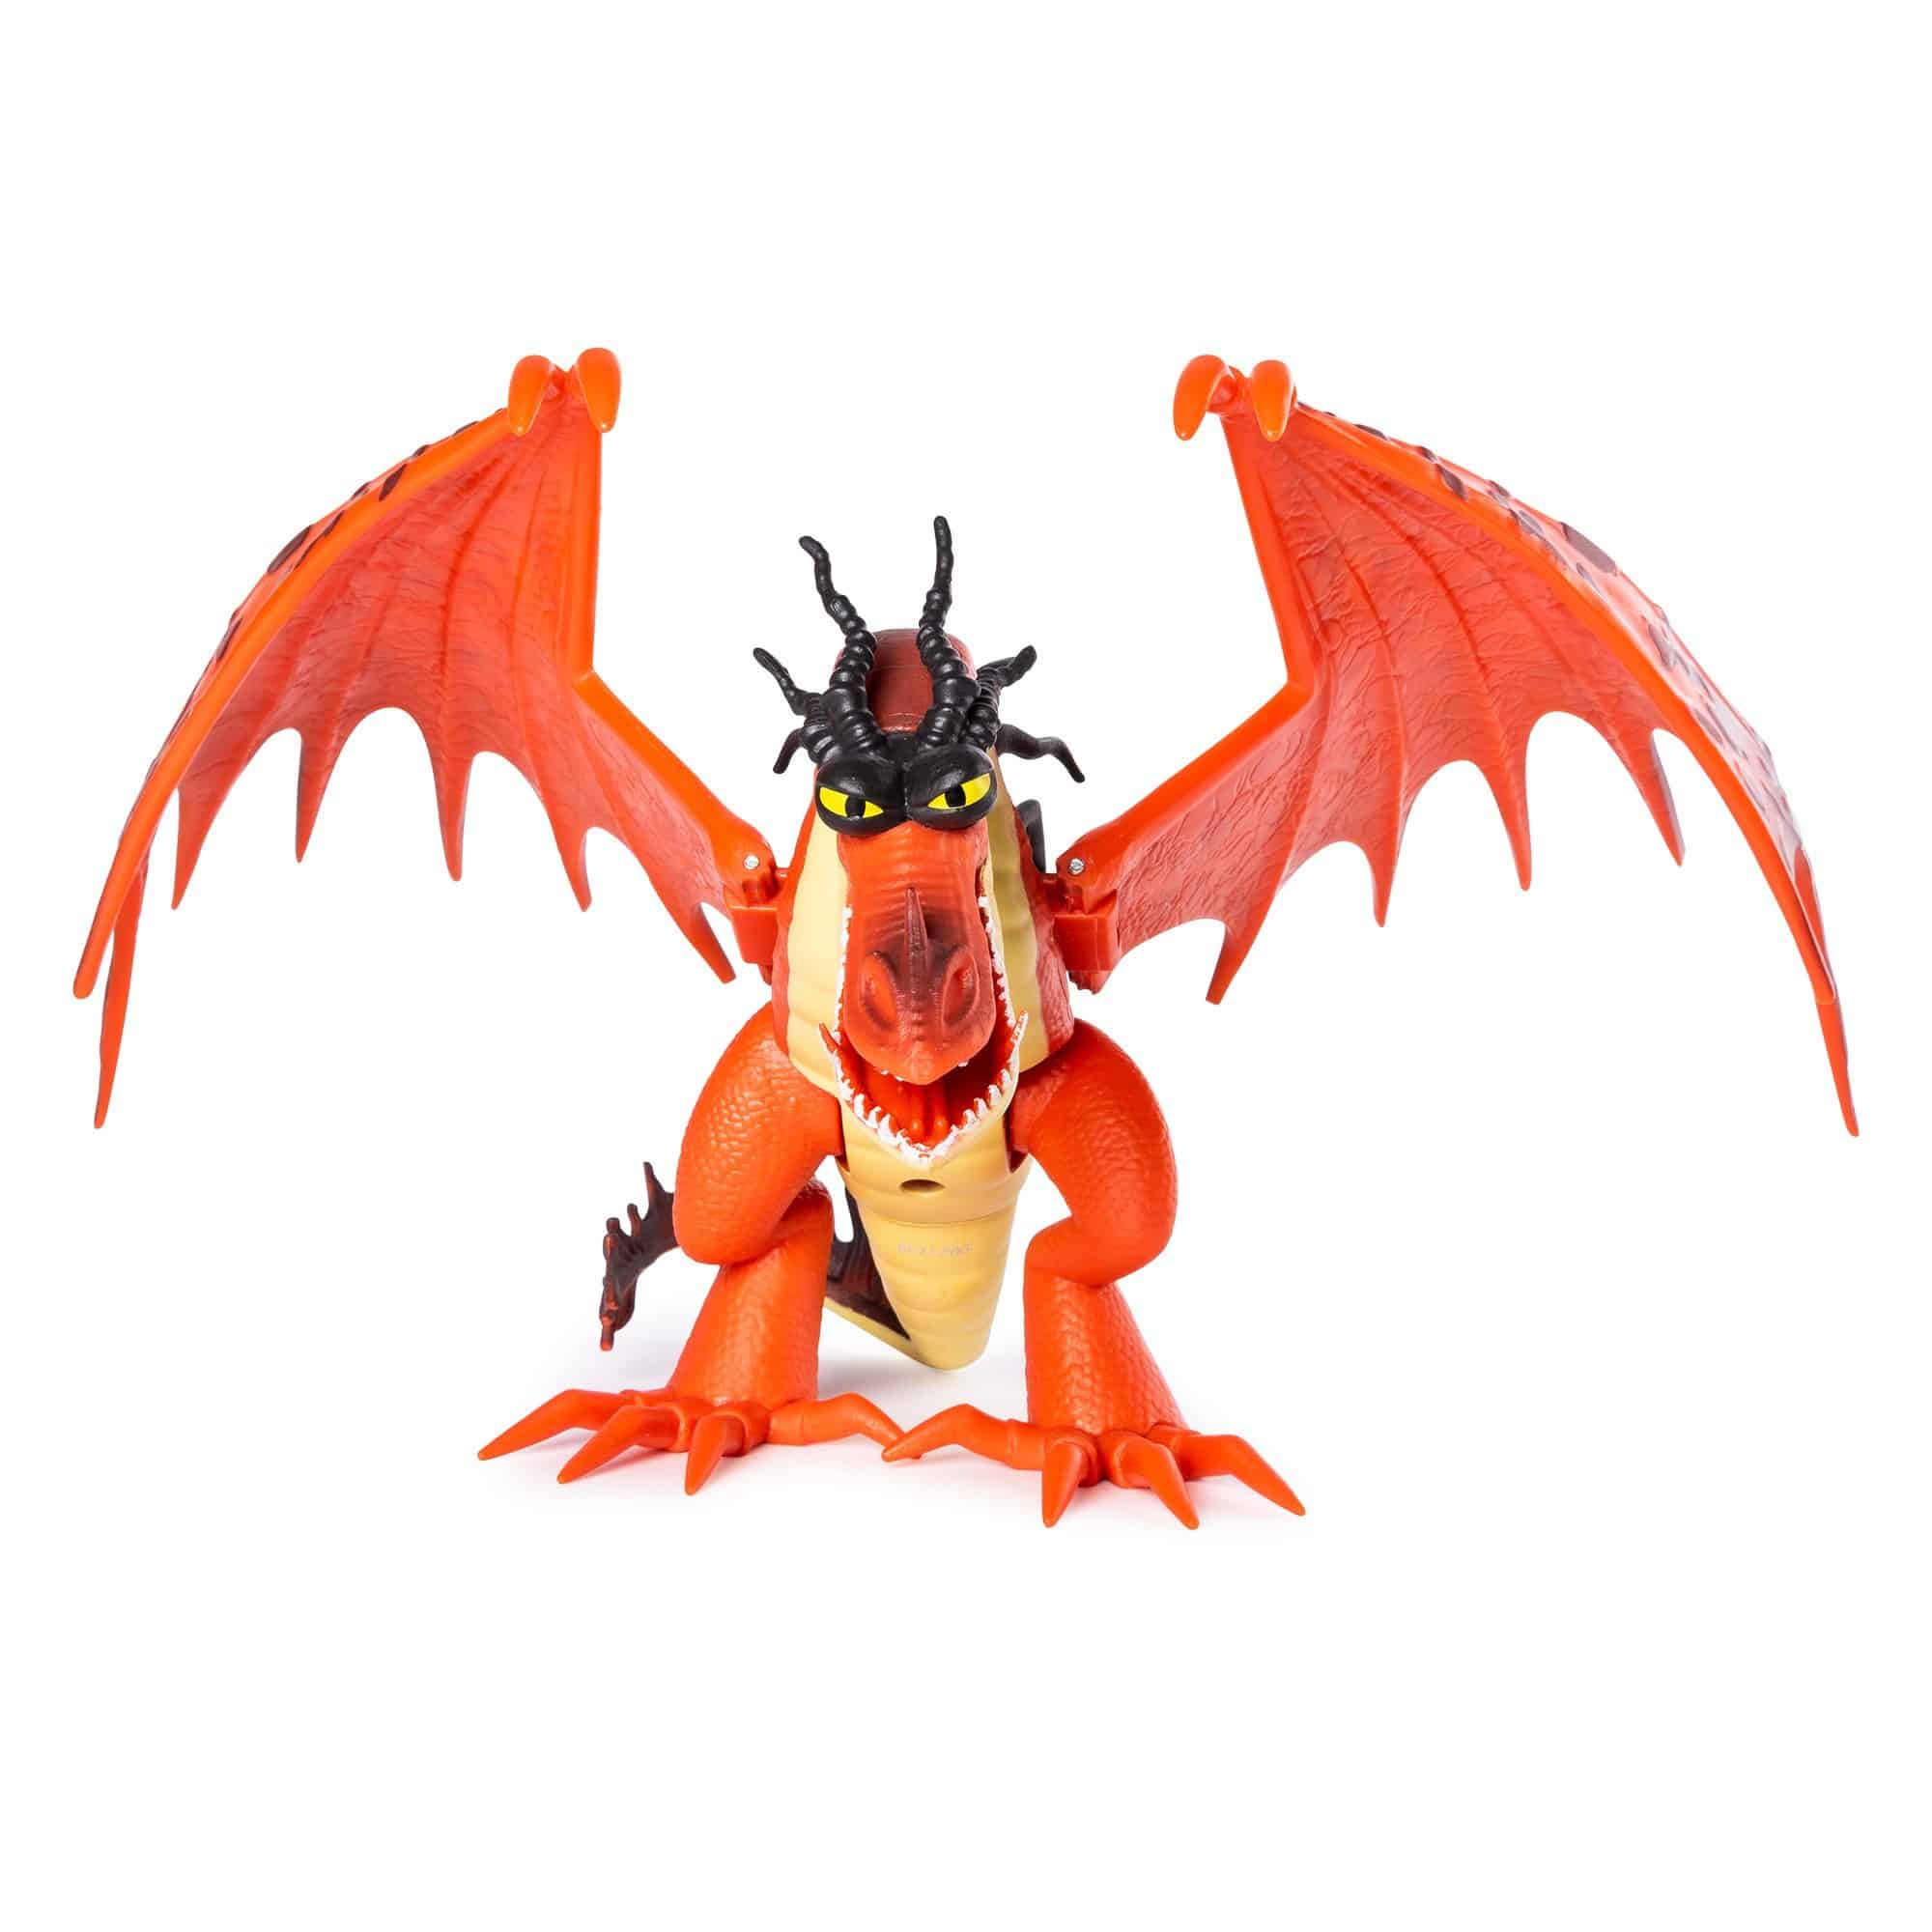 Dreamworks - How To Train Your Dragon 3 - Hookfang Dragon Figure